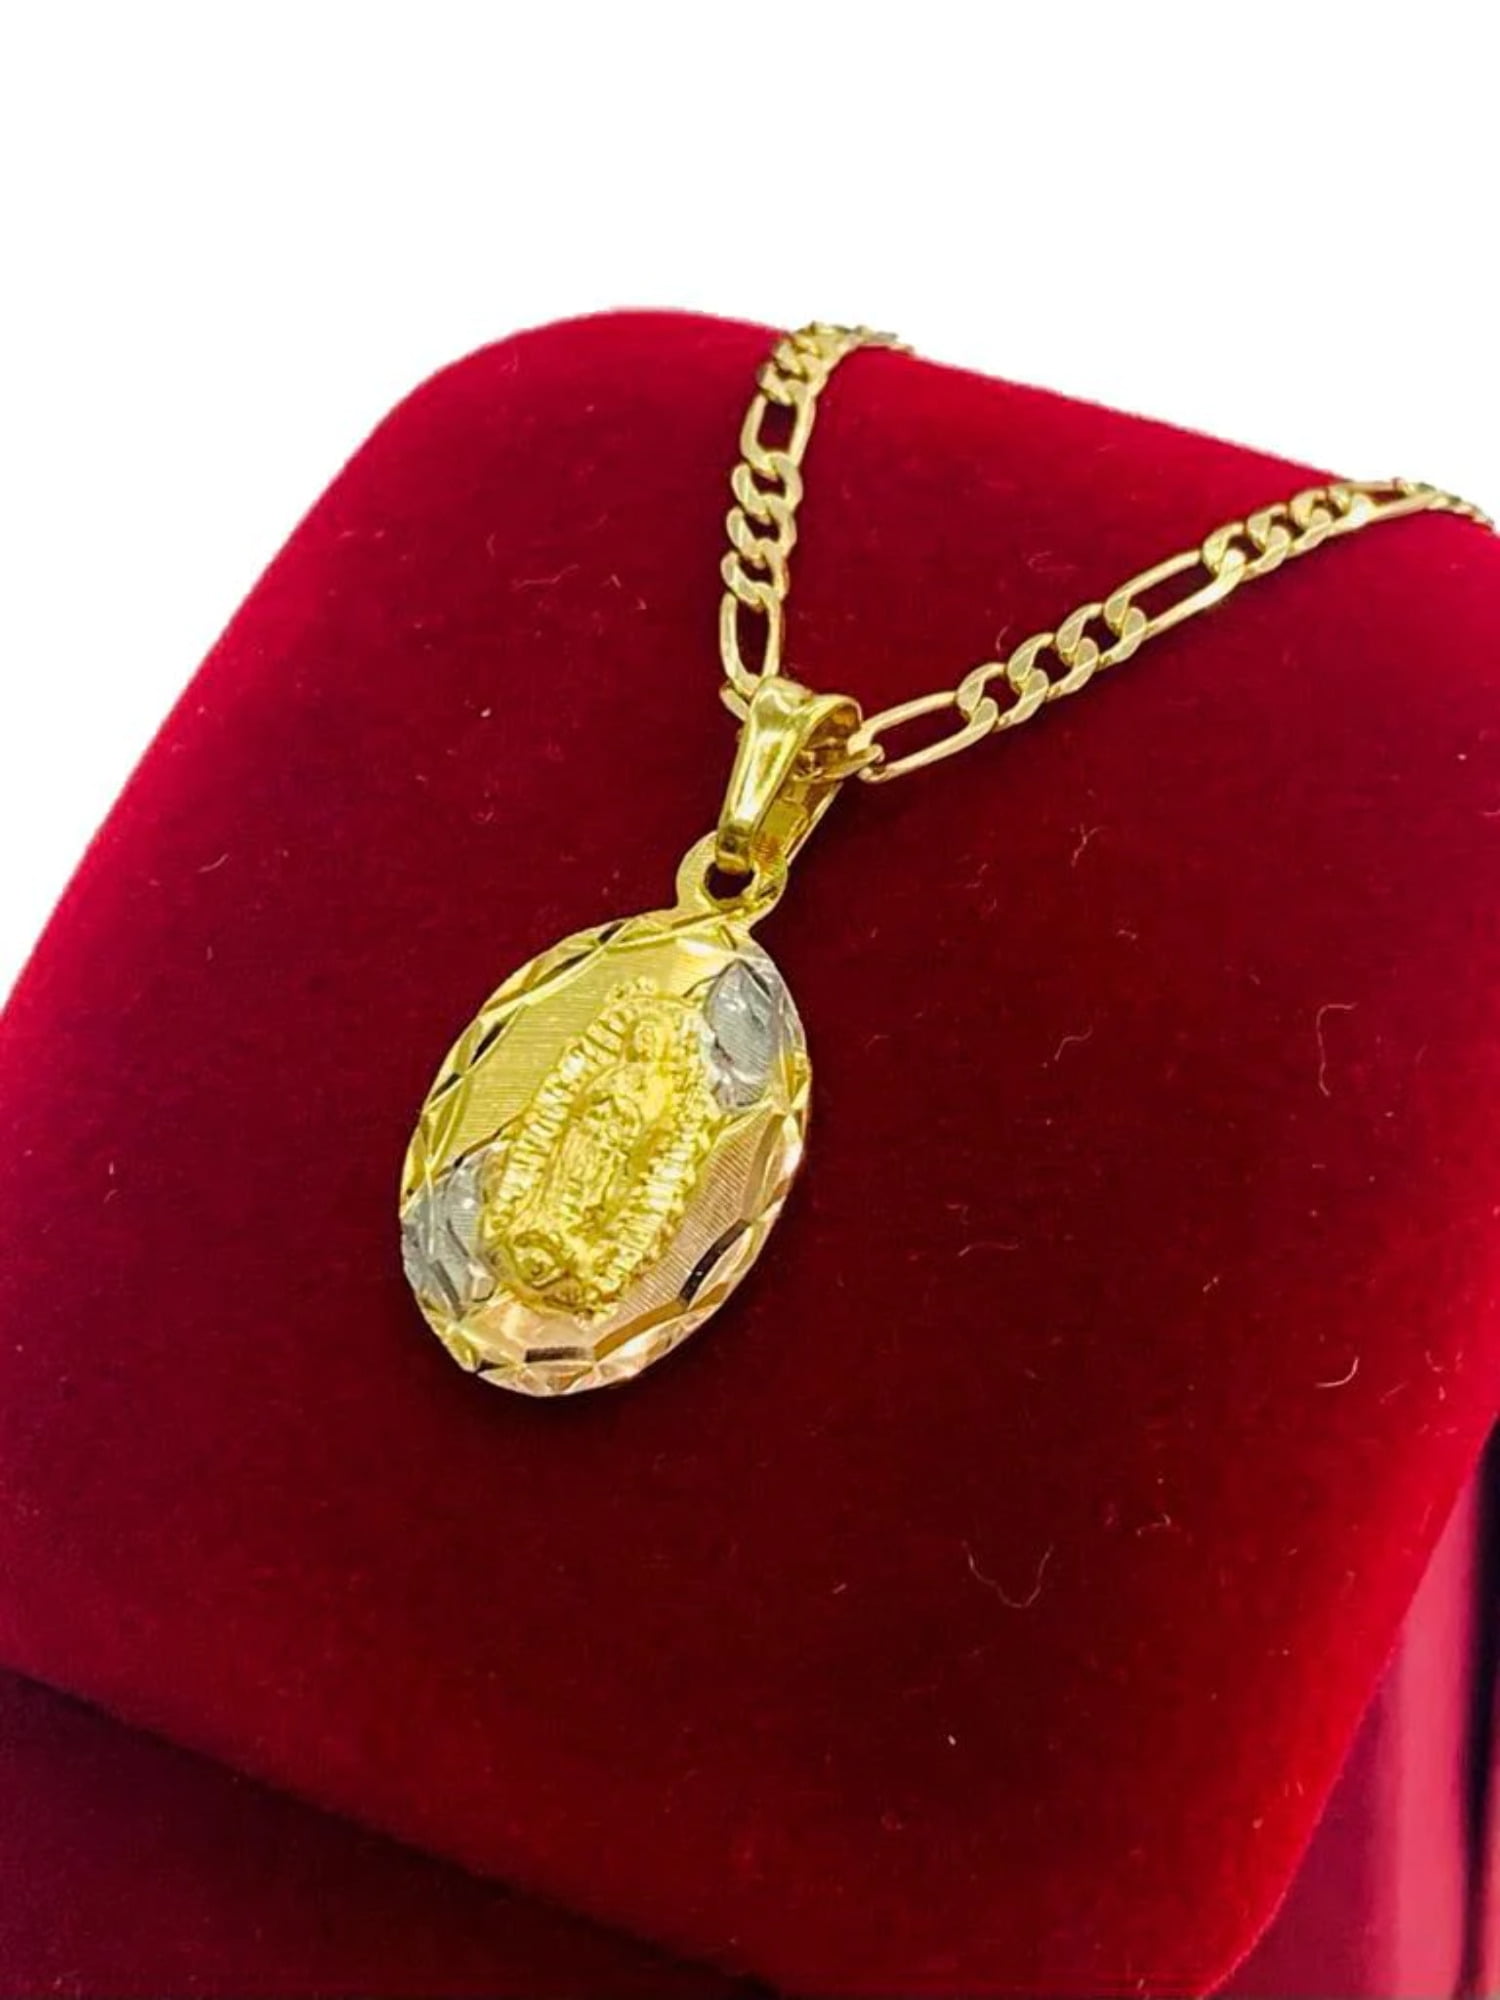 OUR LADY OF GUADALUPE NECKLACE- 14k Yellow Gold/White - The Littl A$144.99  A$144.99 14k Yellow Gold Faith Necklaces